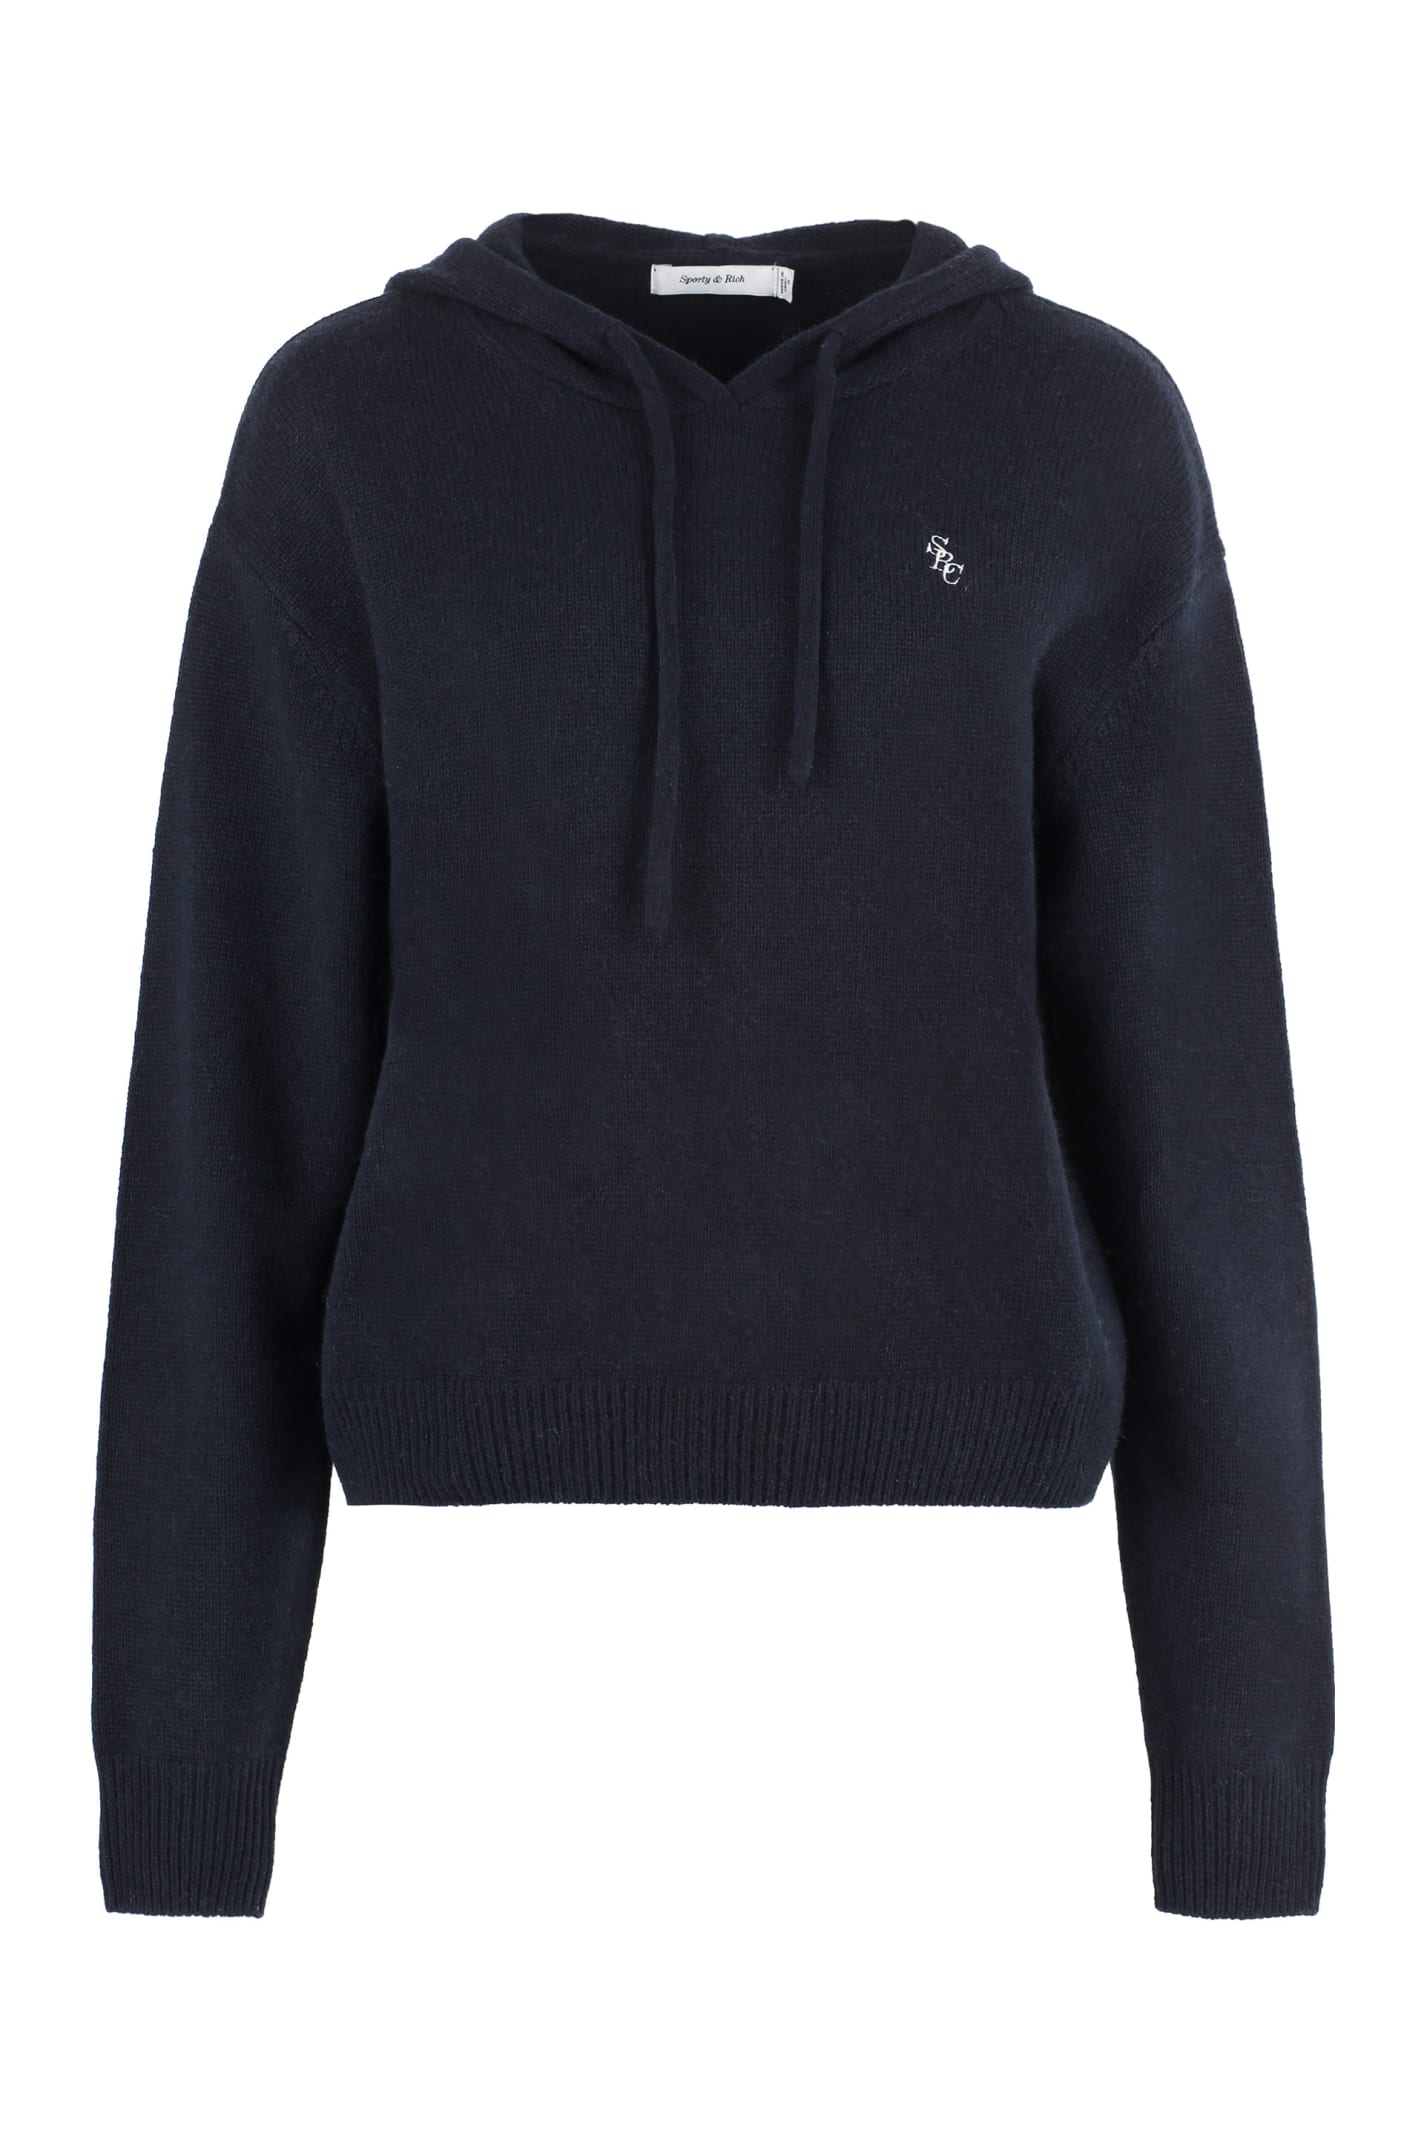 Sporty & Rich Knitted Hoodie